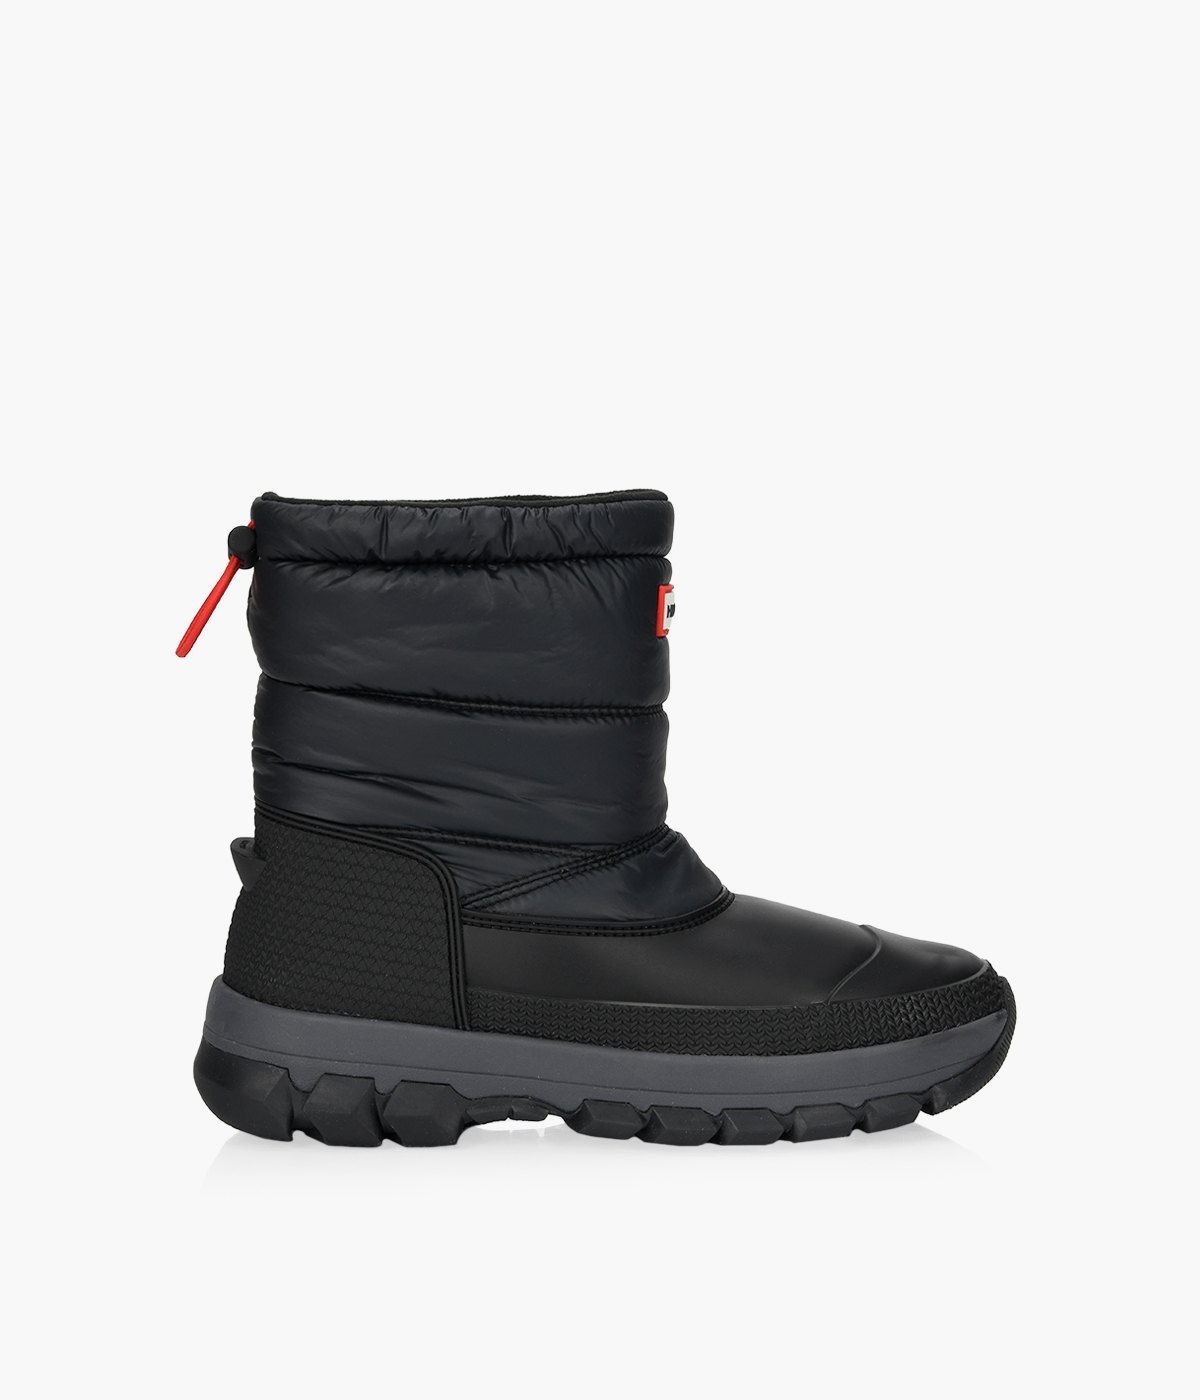 HUNTER ORIGINAL INSULATED SHORT SNOW BOOTS - Black Nylon | Browns Shoes